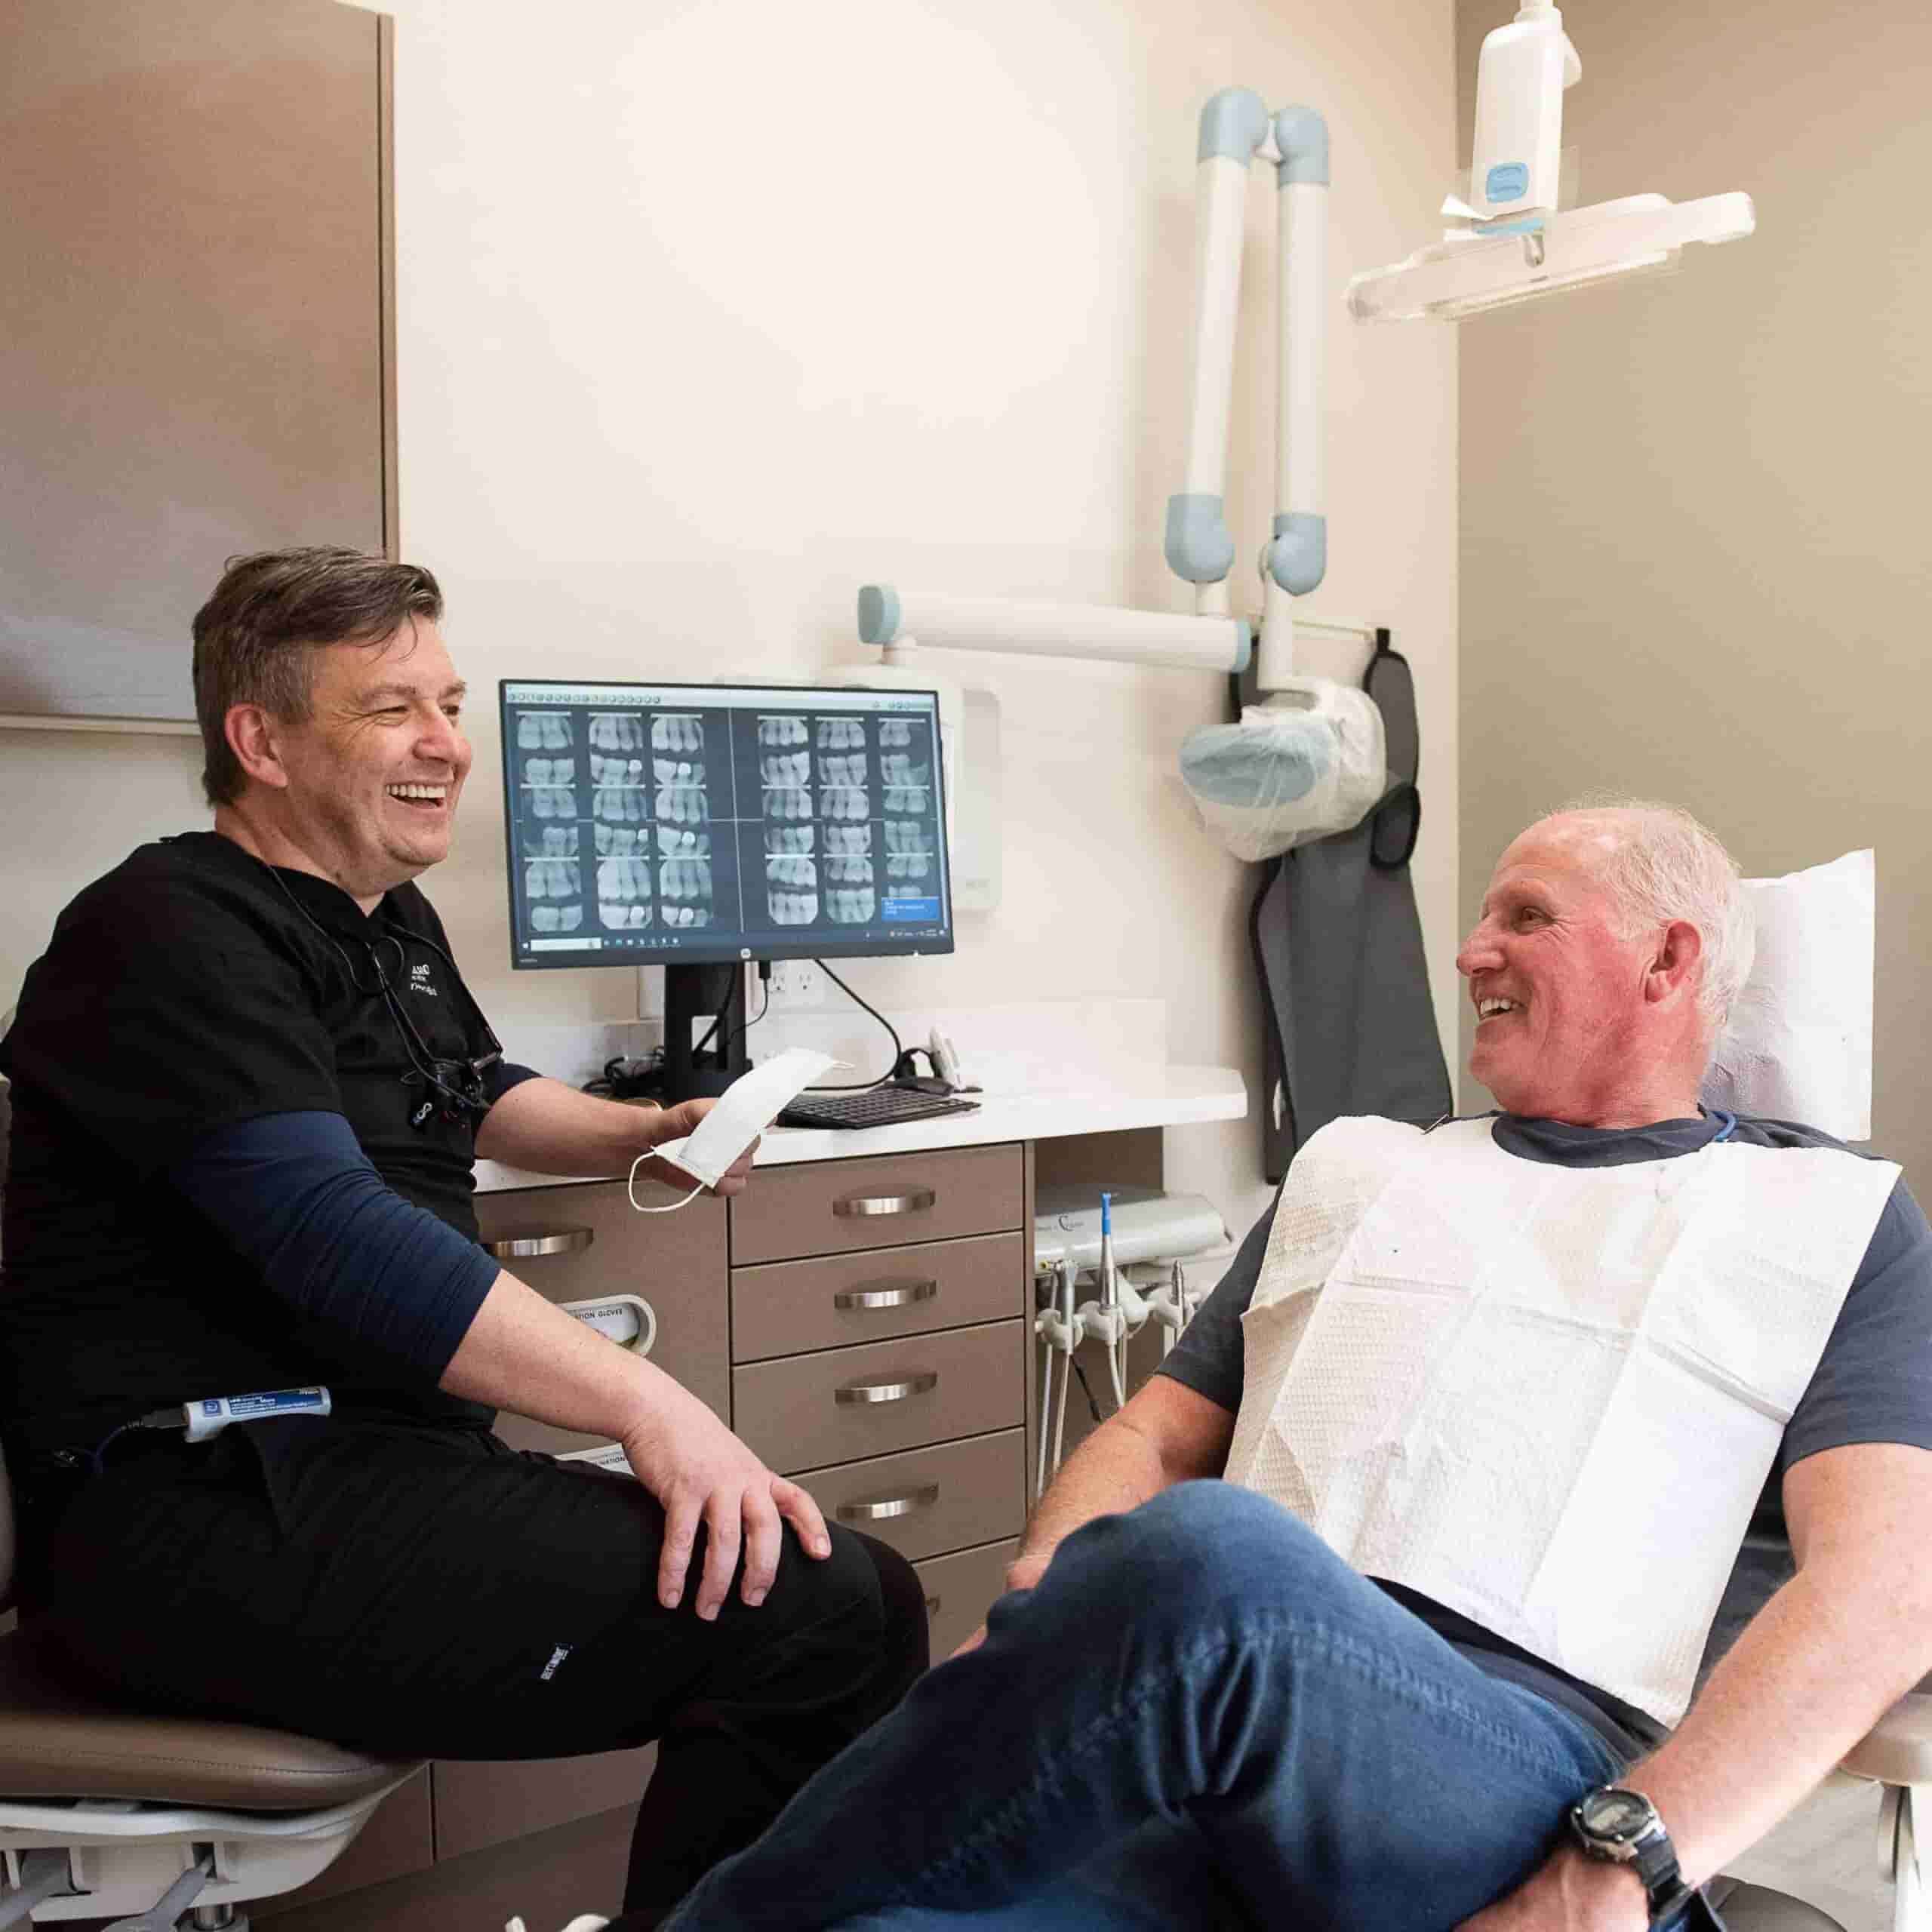 Dentist that listens - man sitting with dentist smiling.